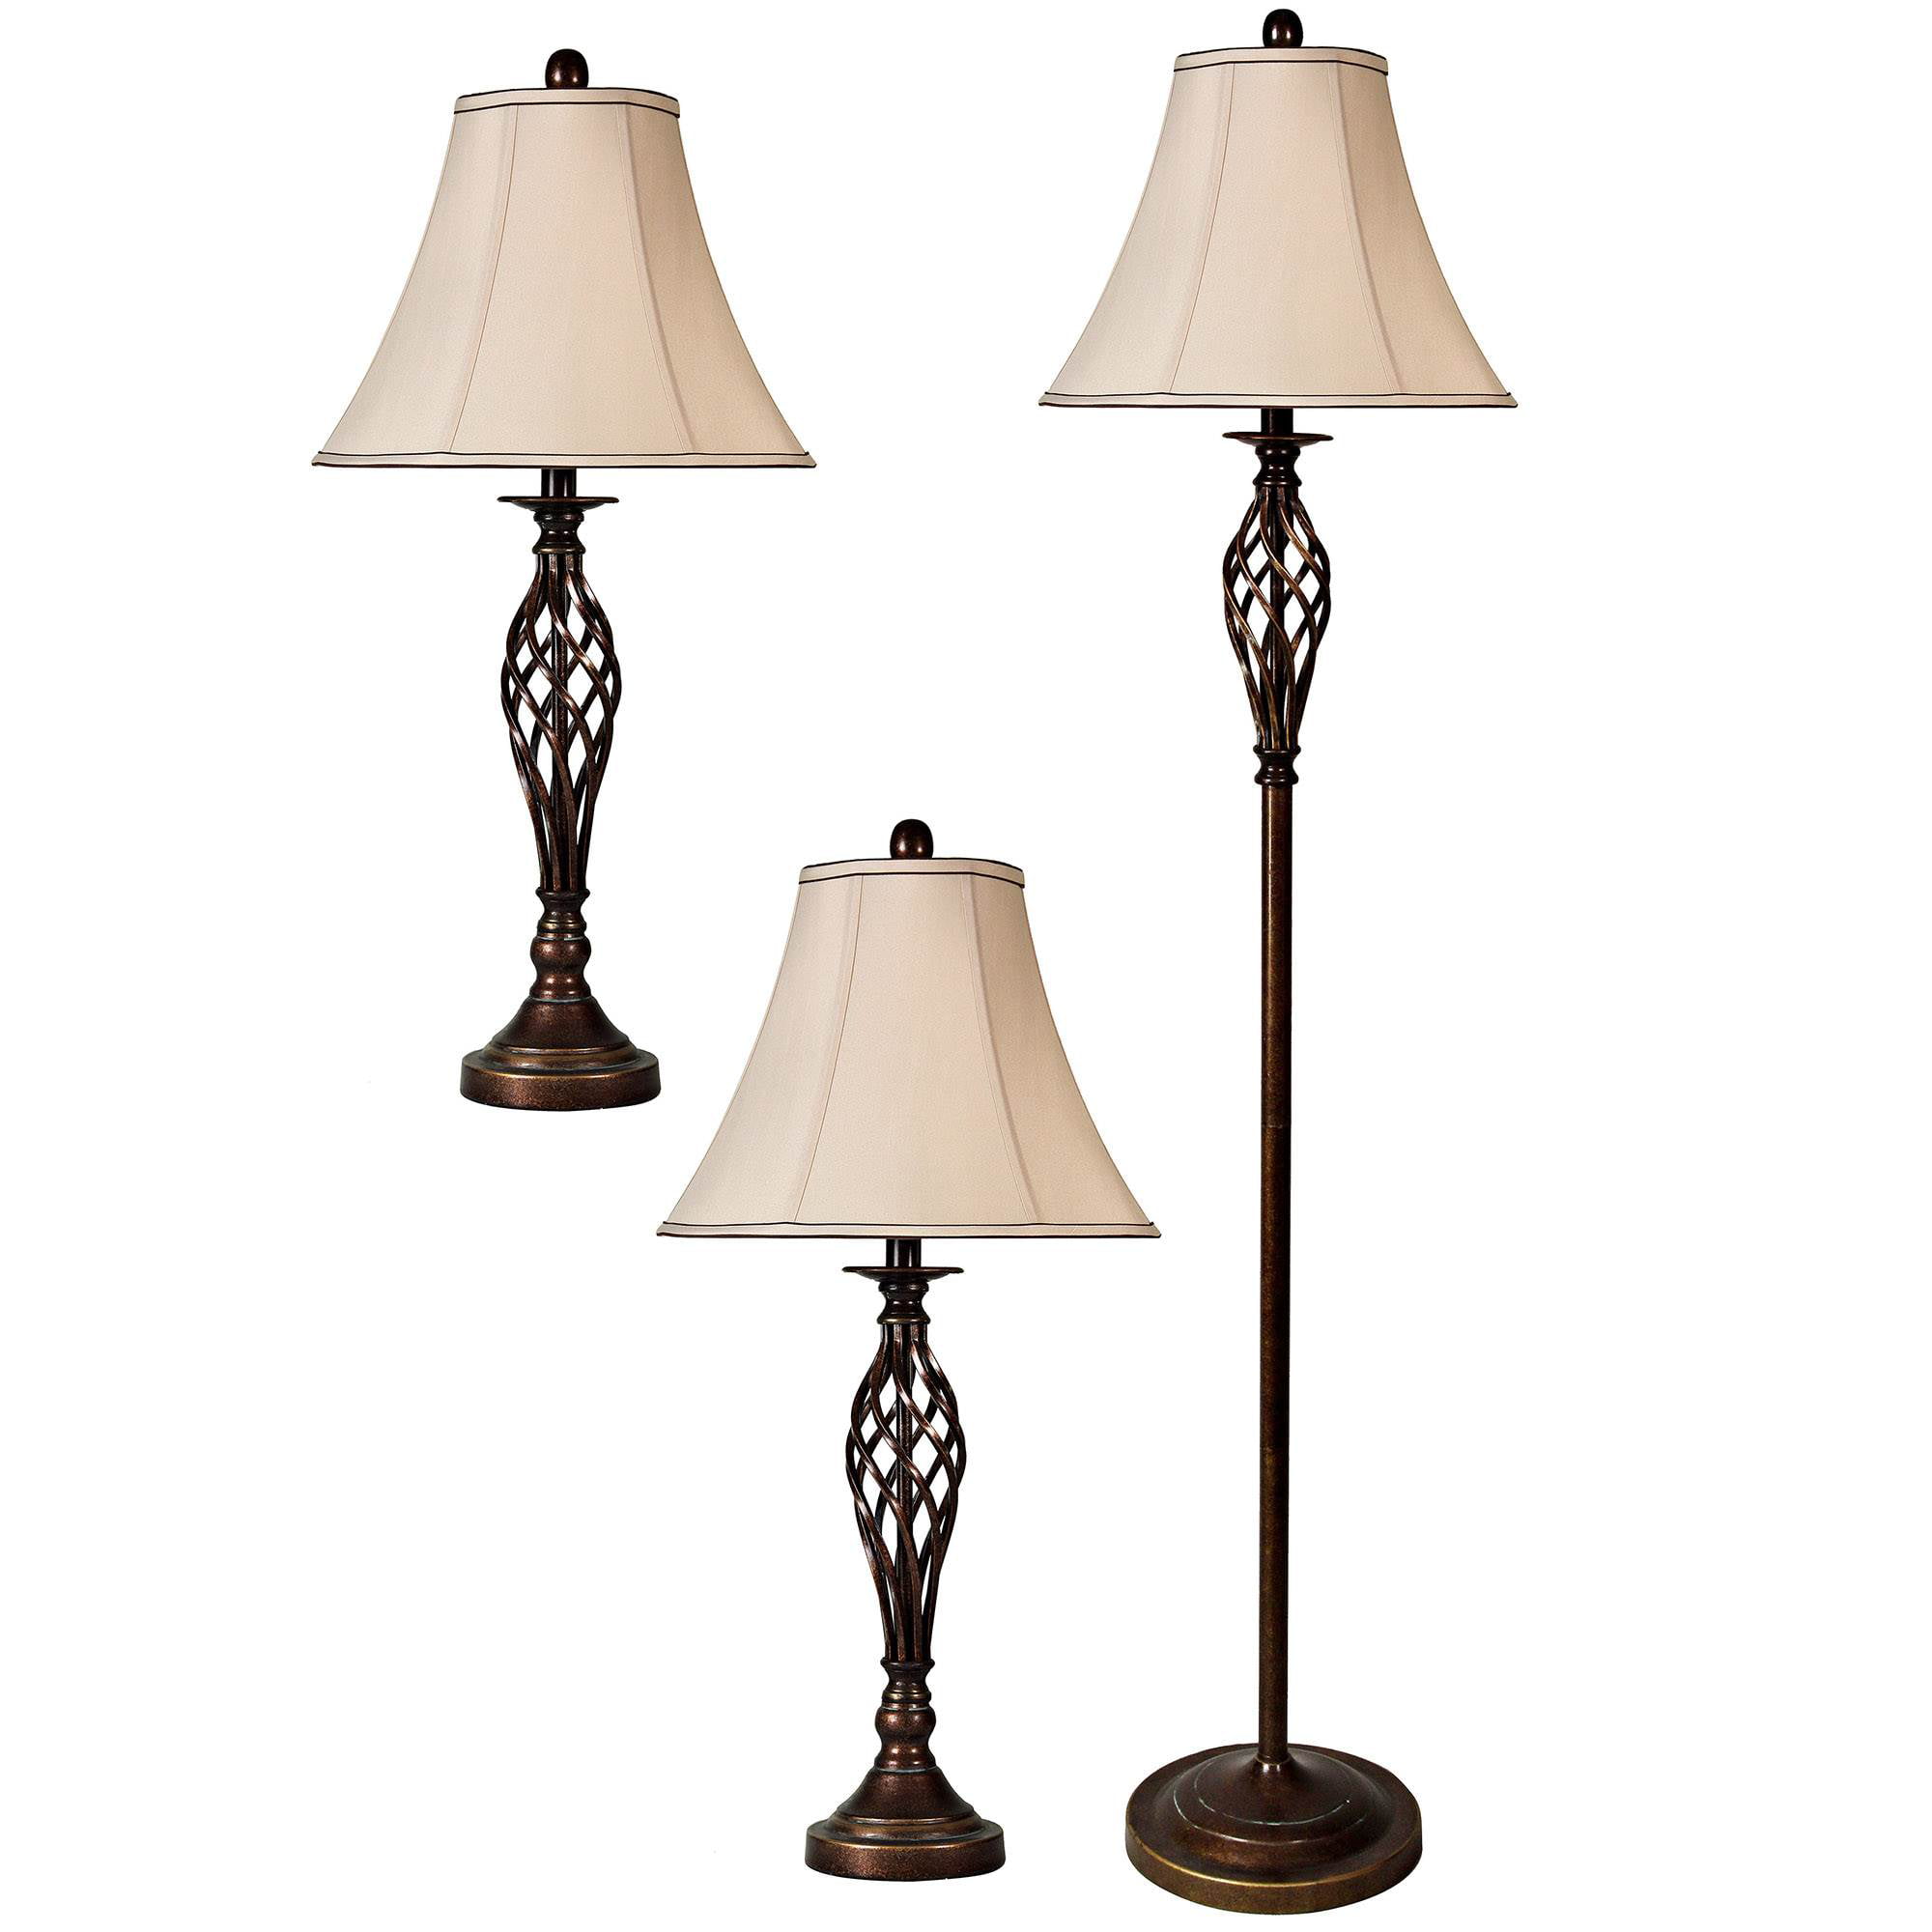 Abode 84 Barclay Brass 3 Piece Living Room Accent Table and Floor Lamp